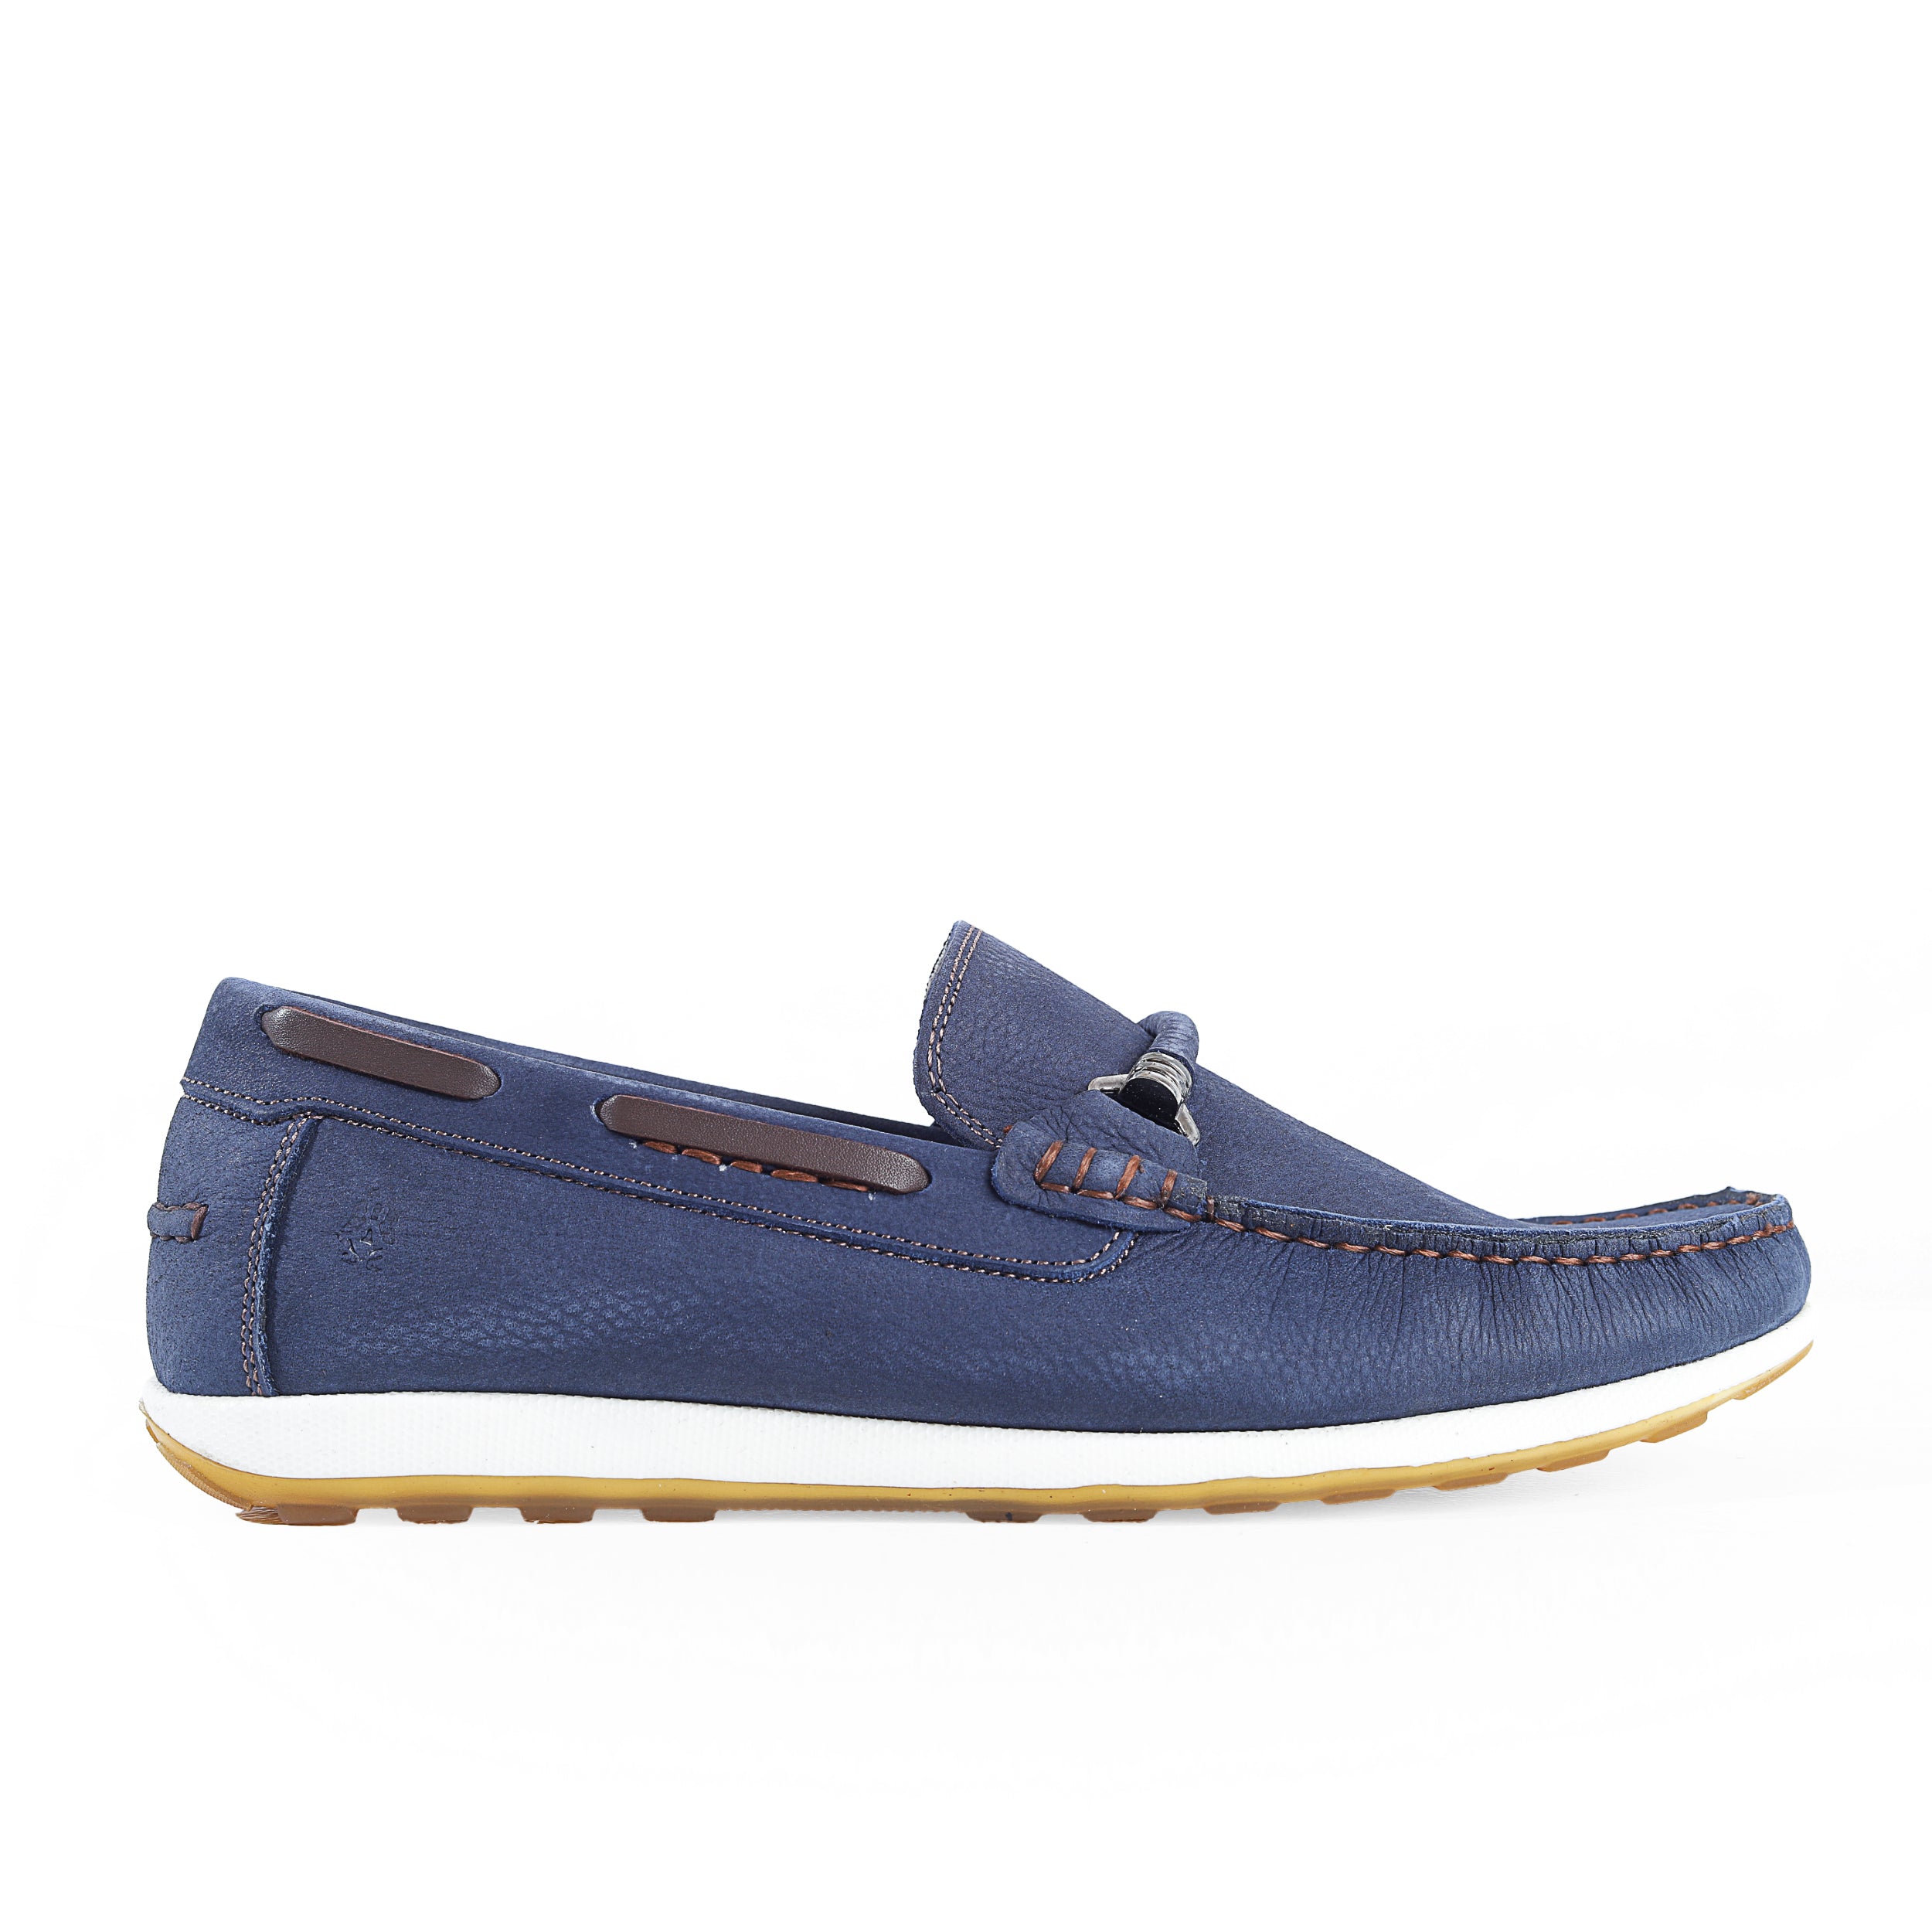 Hush Puppies Suede Loafers Shoes 4806